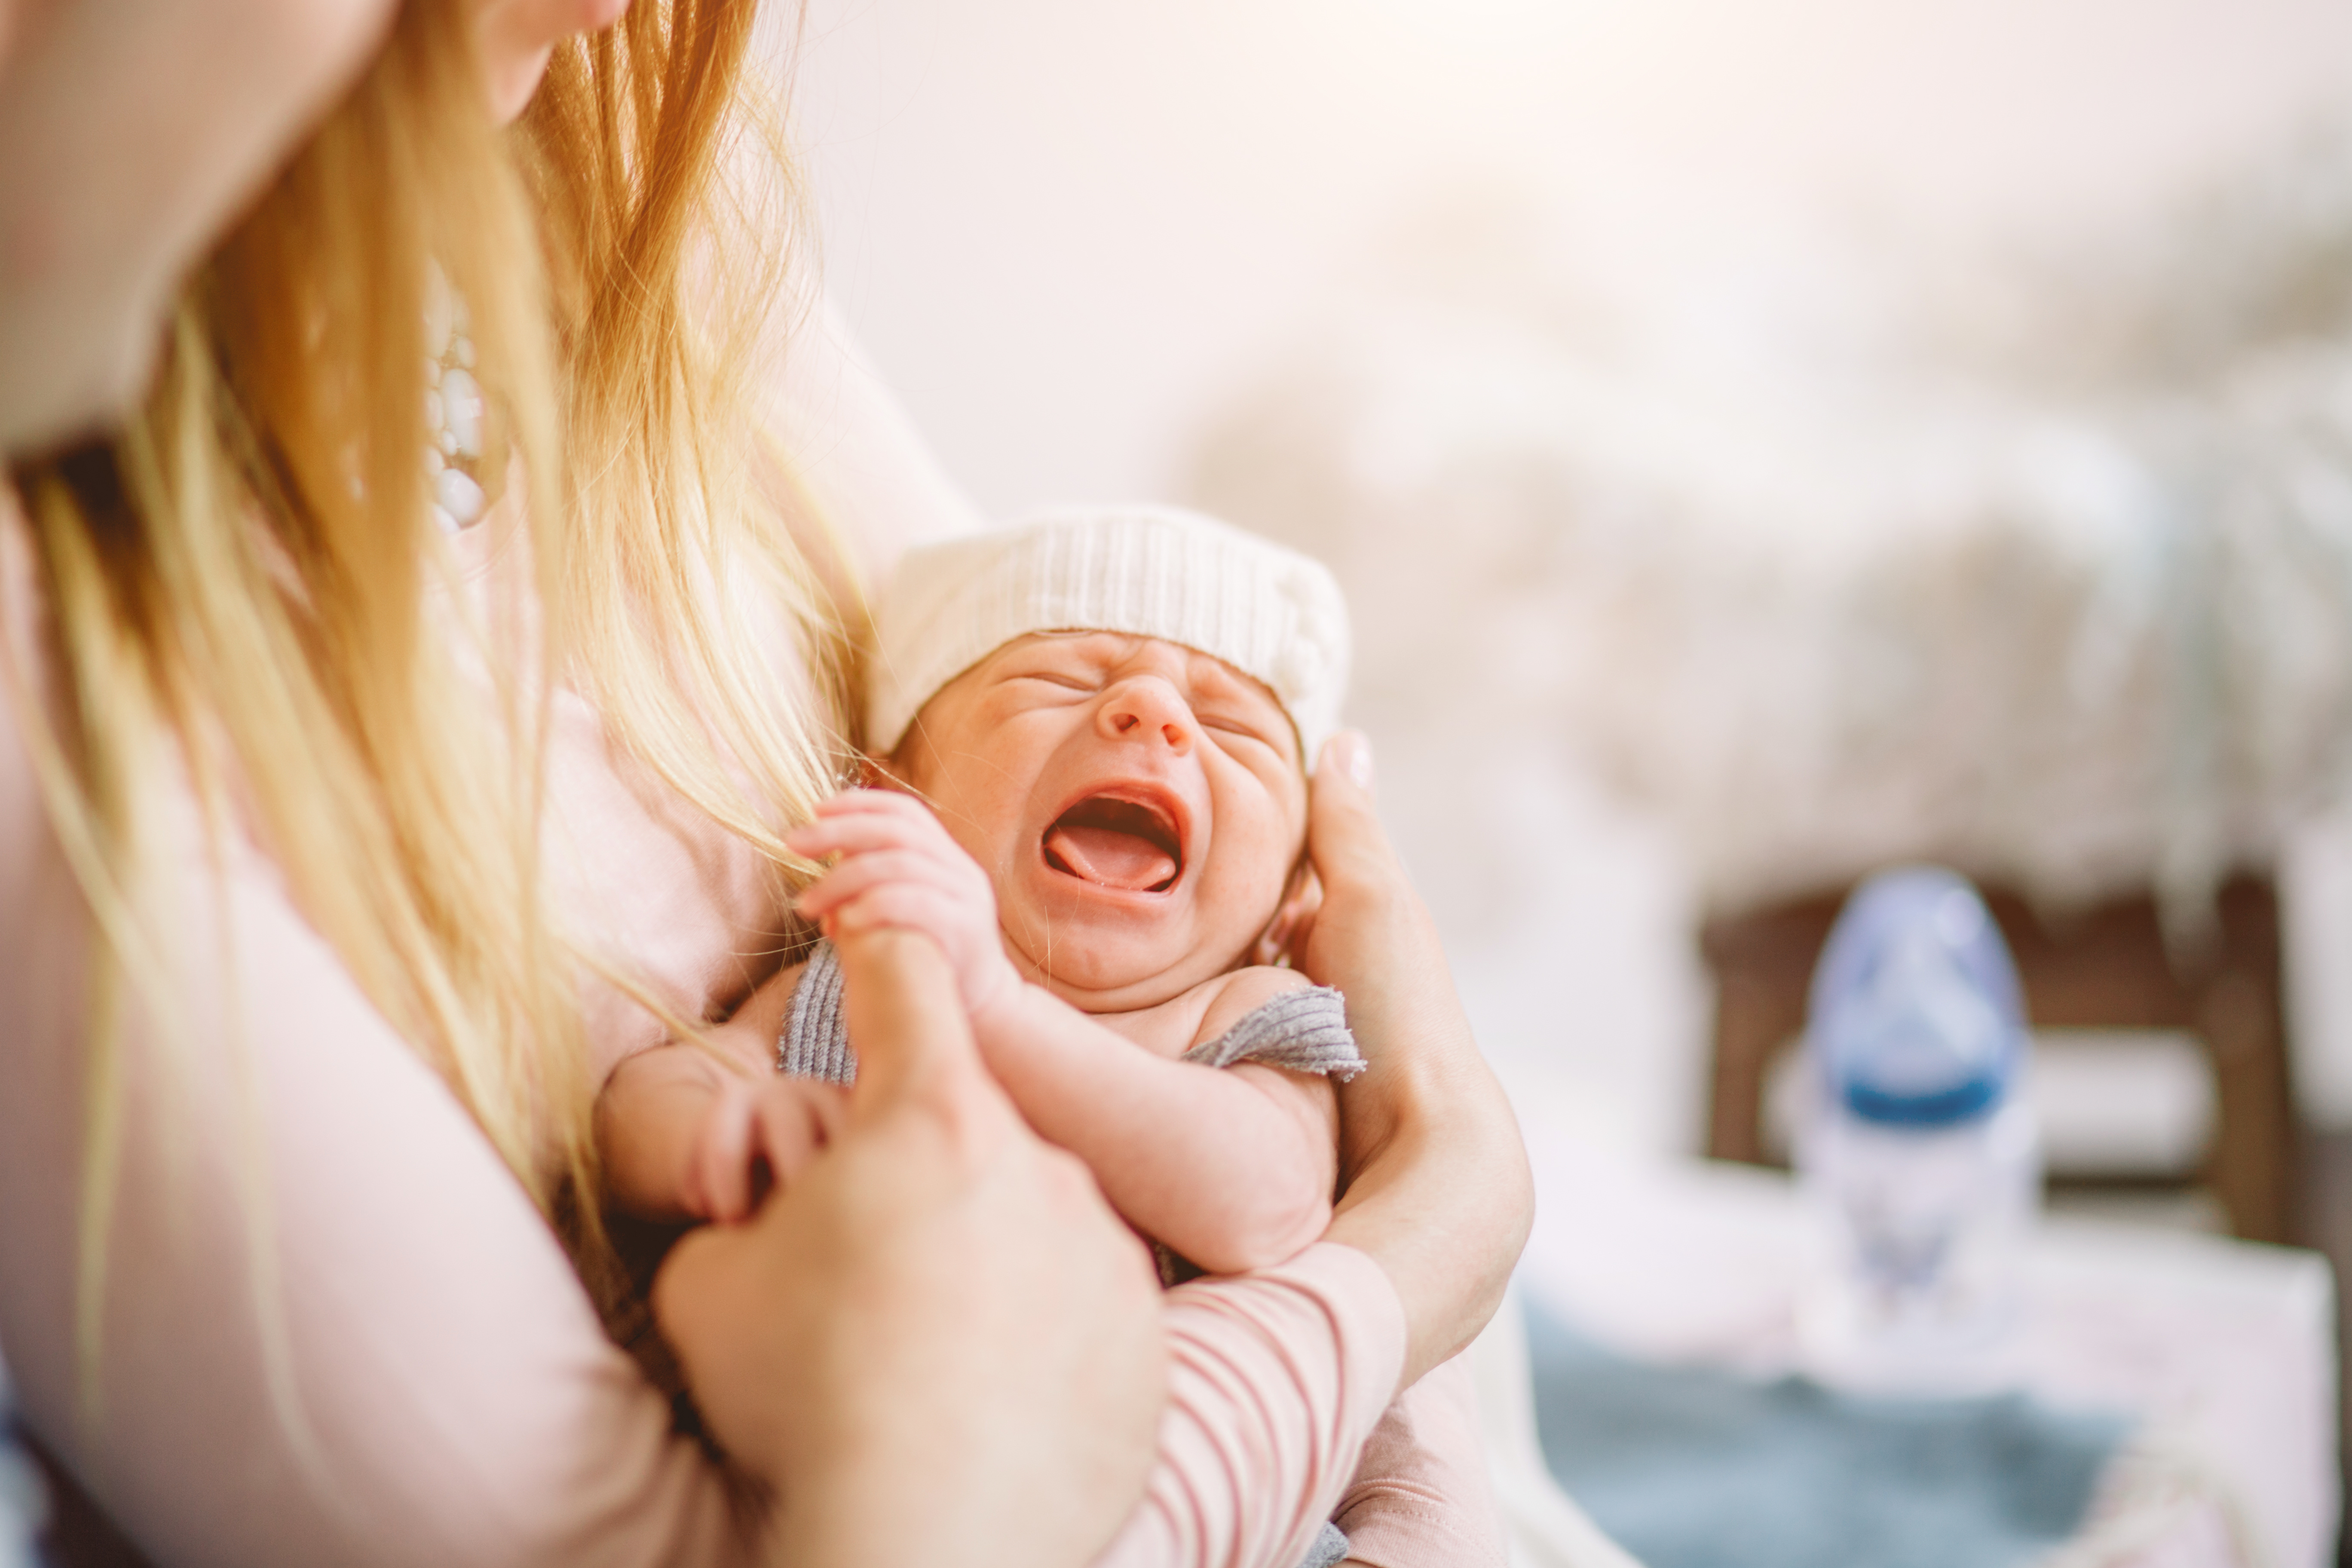 How to Spot the Signs of Colic in Babies